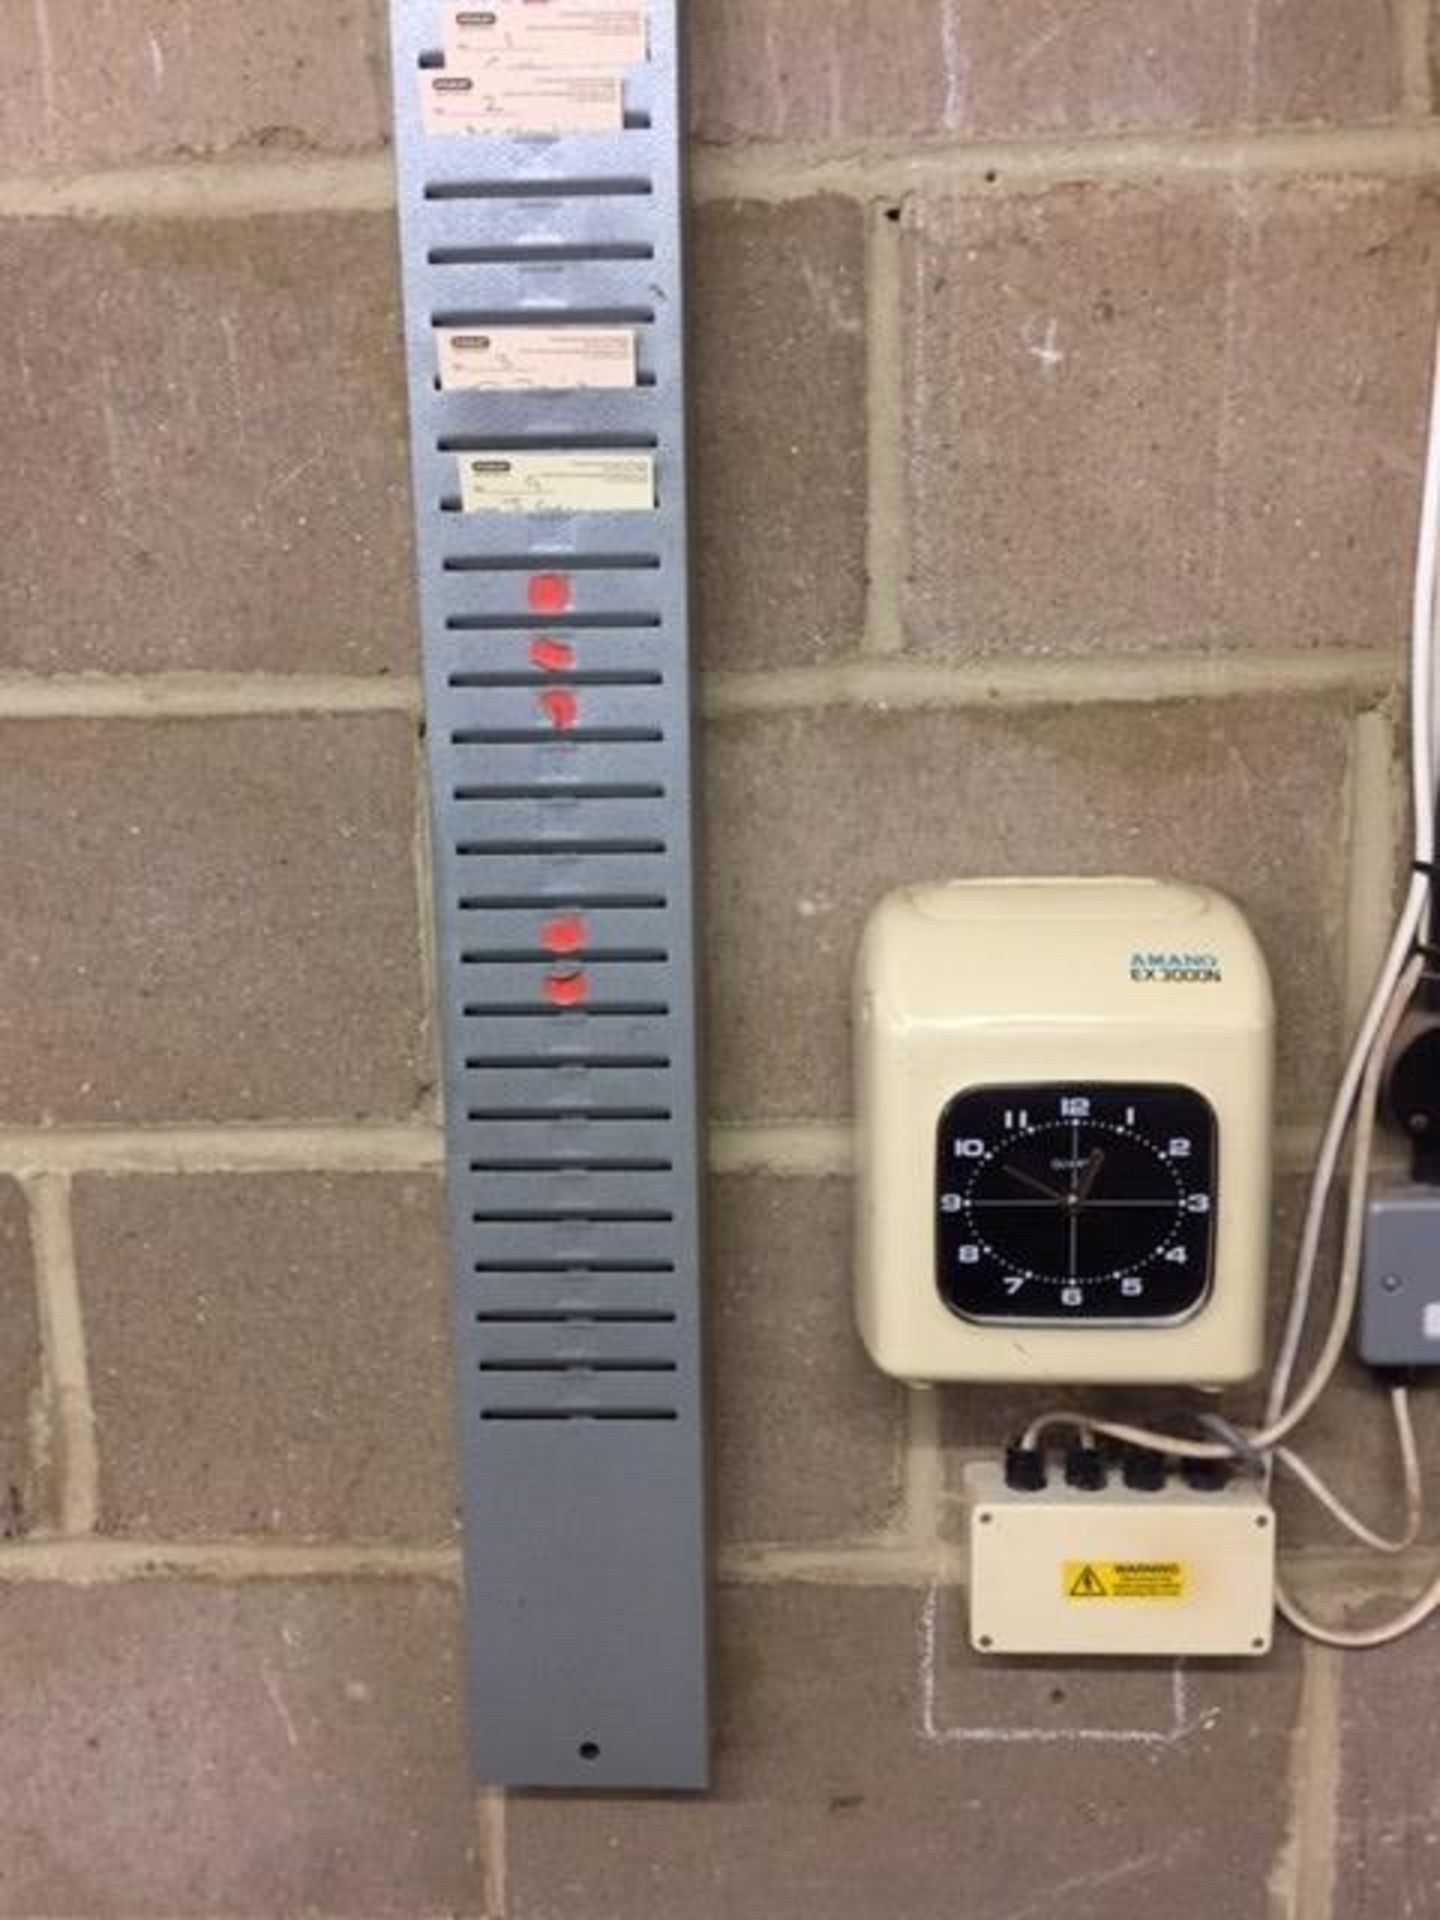 Amano EX3000N electronic time attendance register - Image 2 of 2